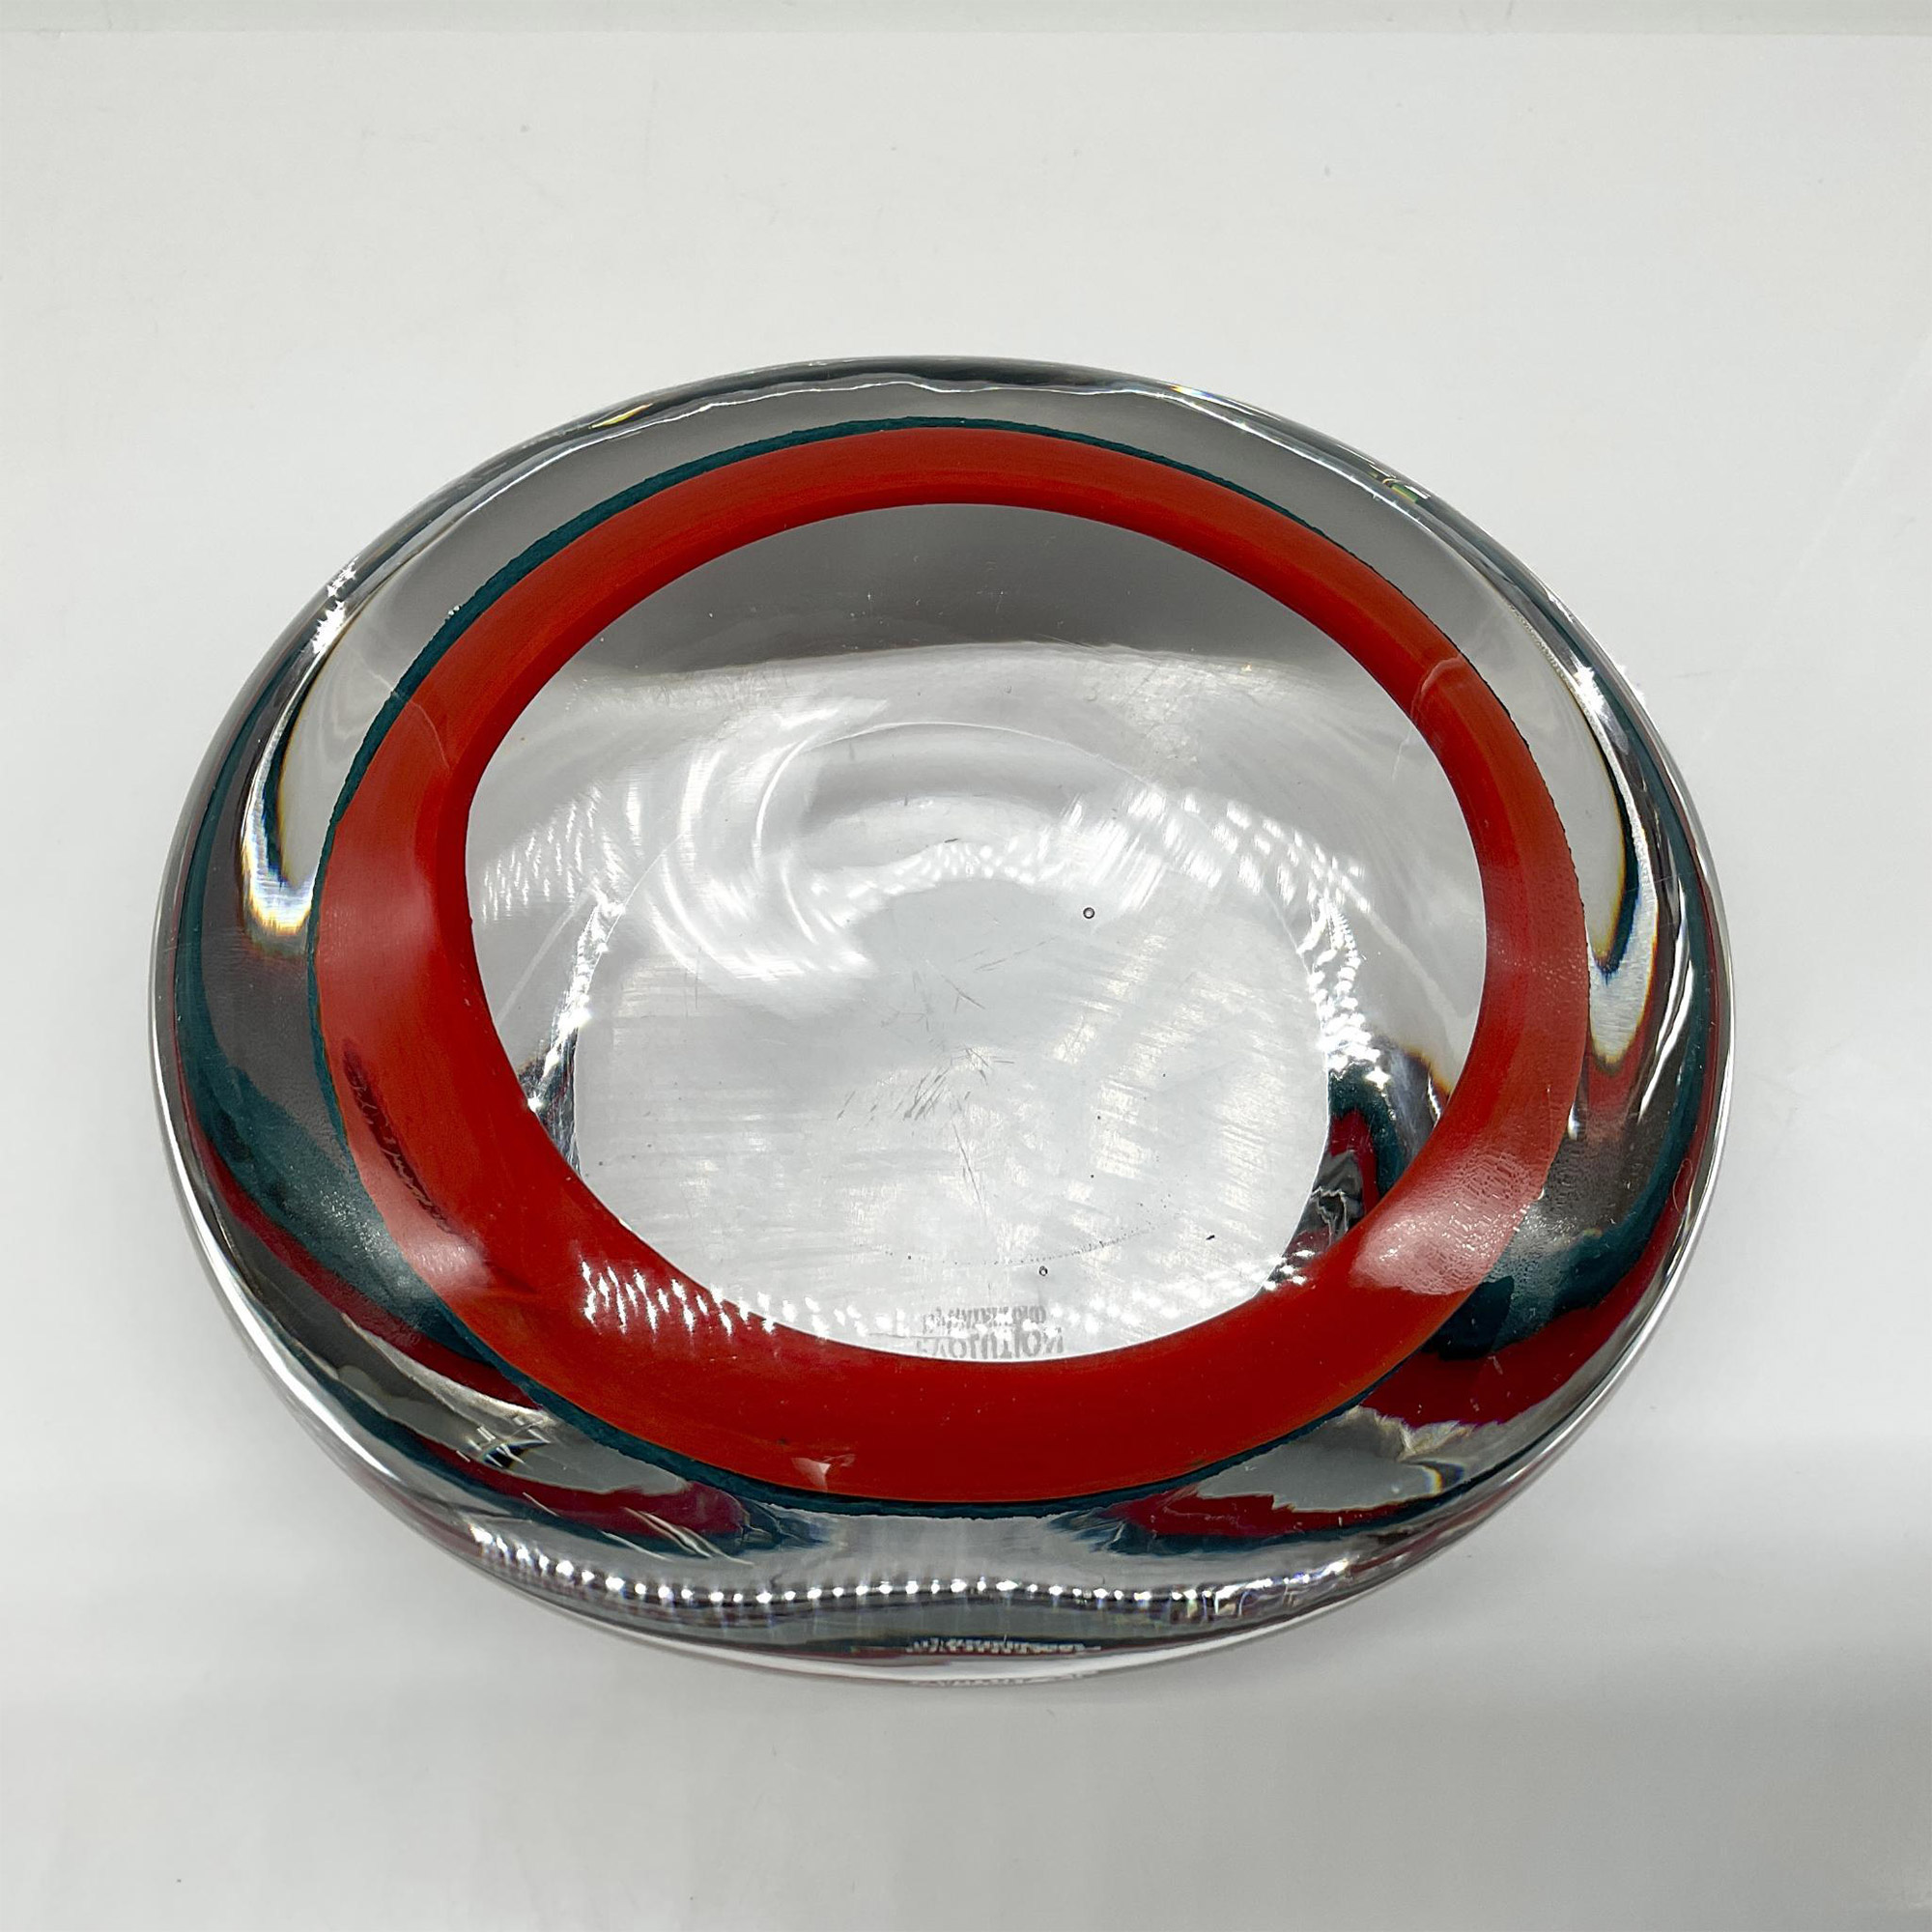 Evolution by Waterford Crystal Paperweight - Image 2 of 3